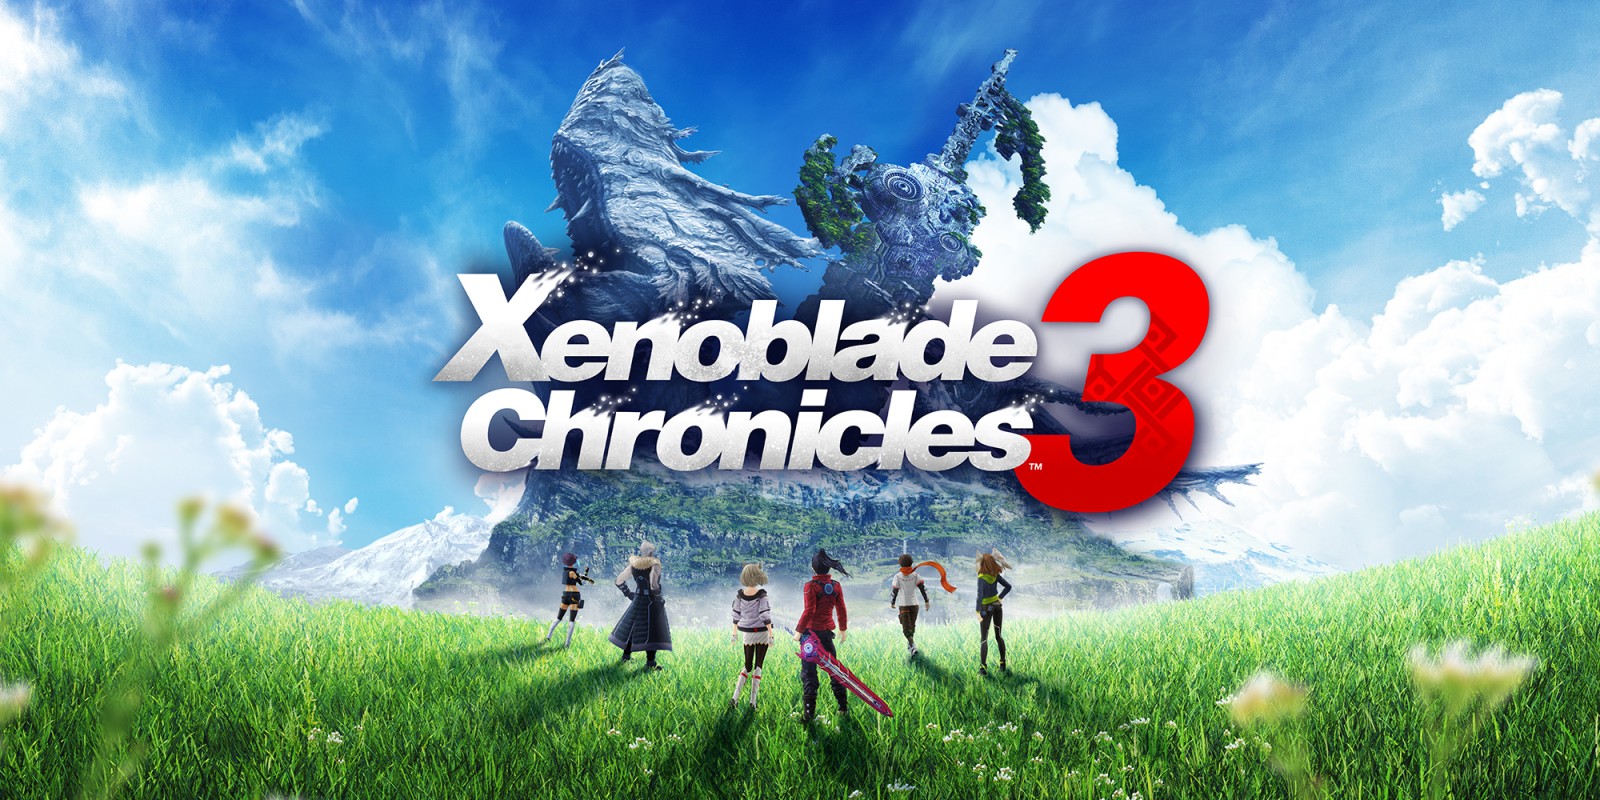 Nintendo Direct will take place on June 22 - a show dedicated to Xenoblade Chronicles 3